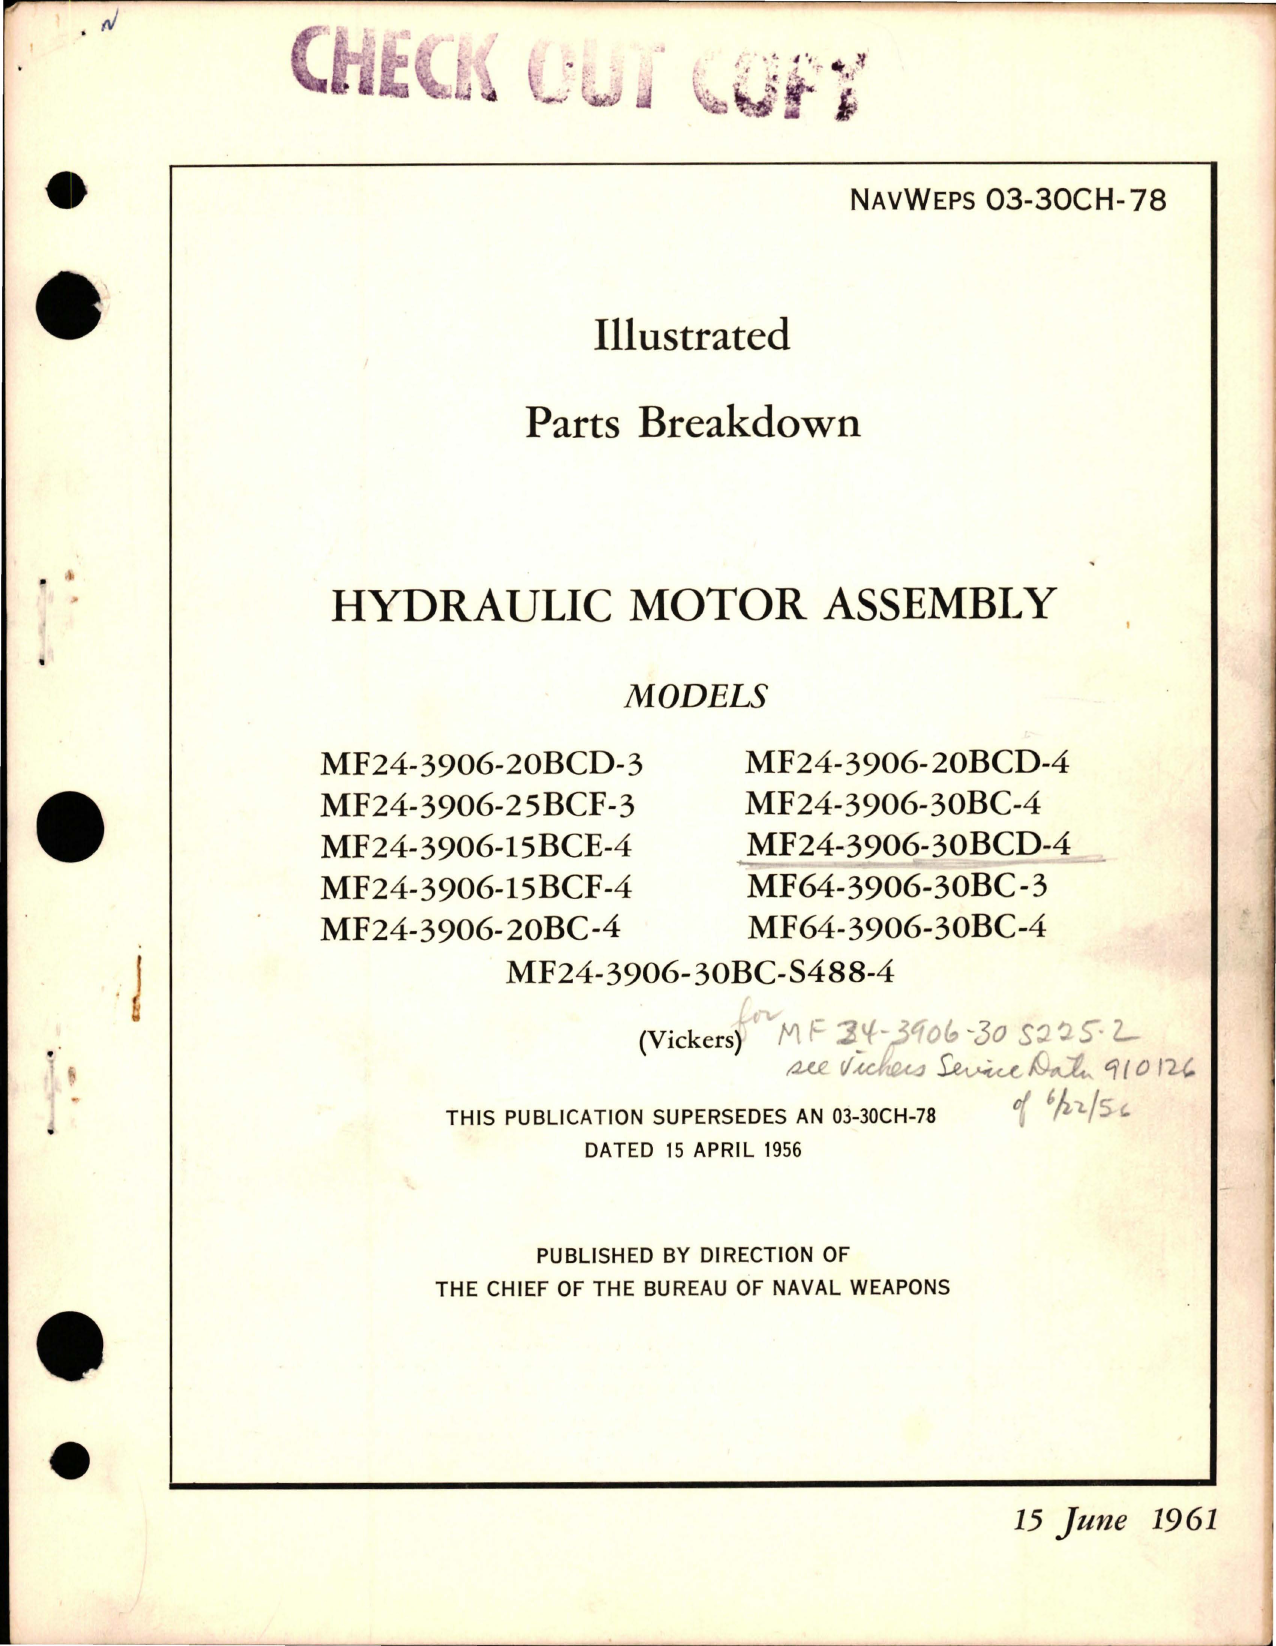 Sample page 1 from AirCorps Library document: Illustrated Parts Breakdown for Hydraulic Motor Assembly